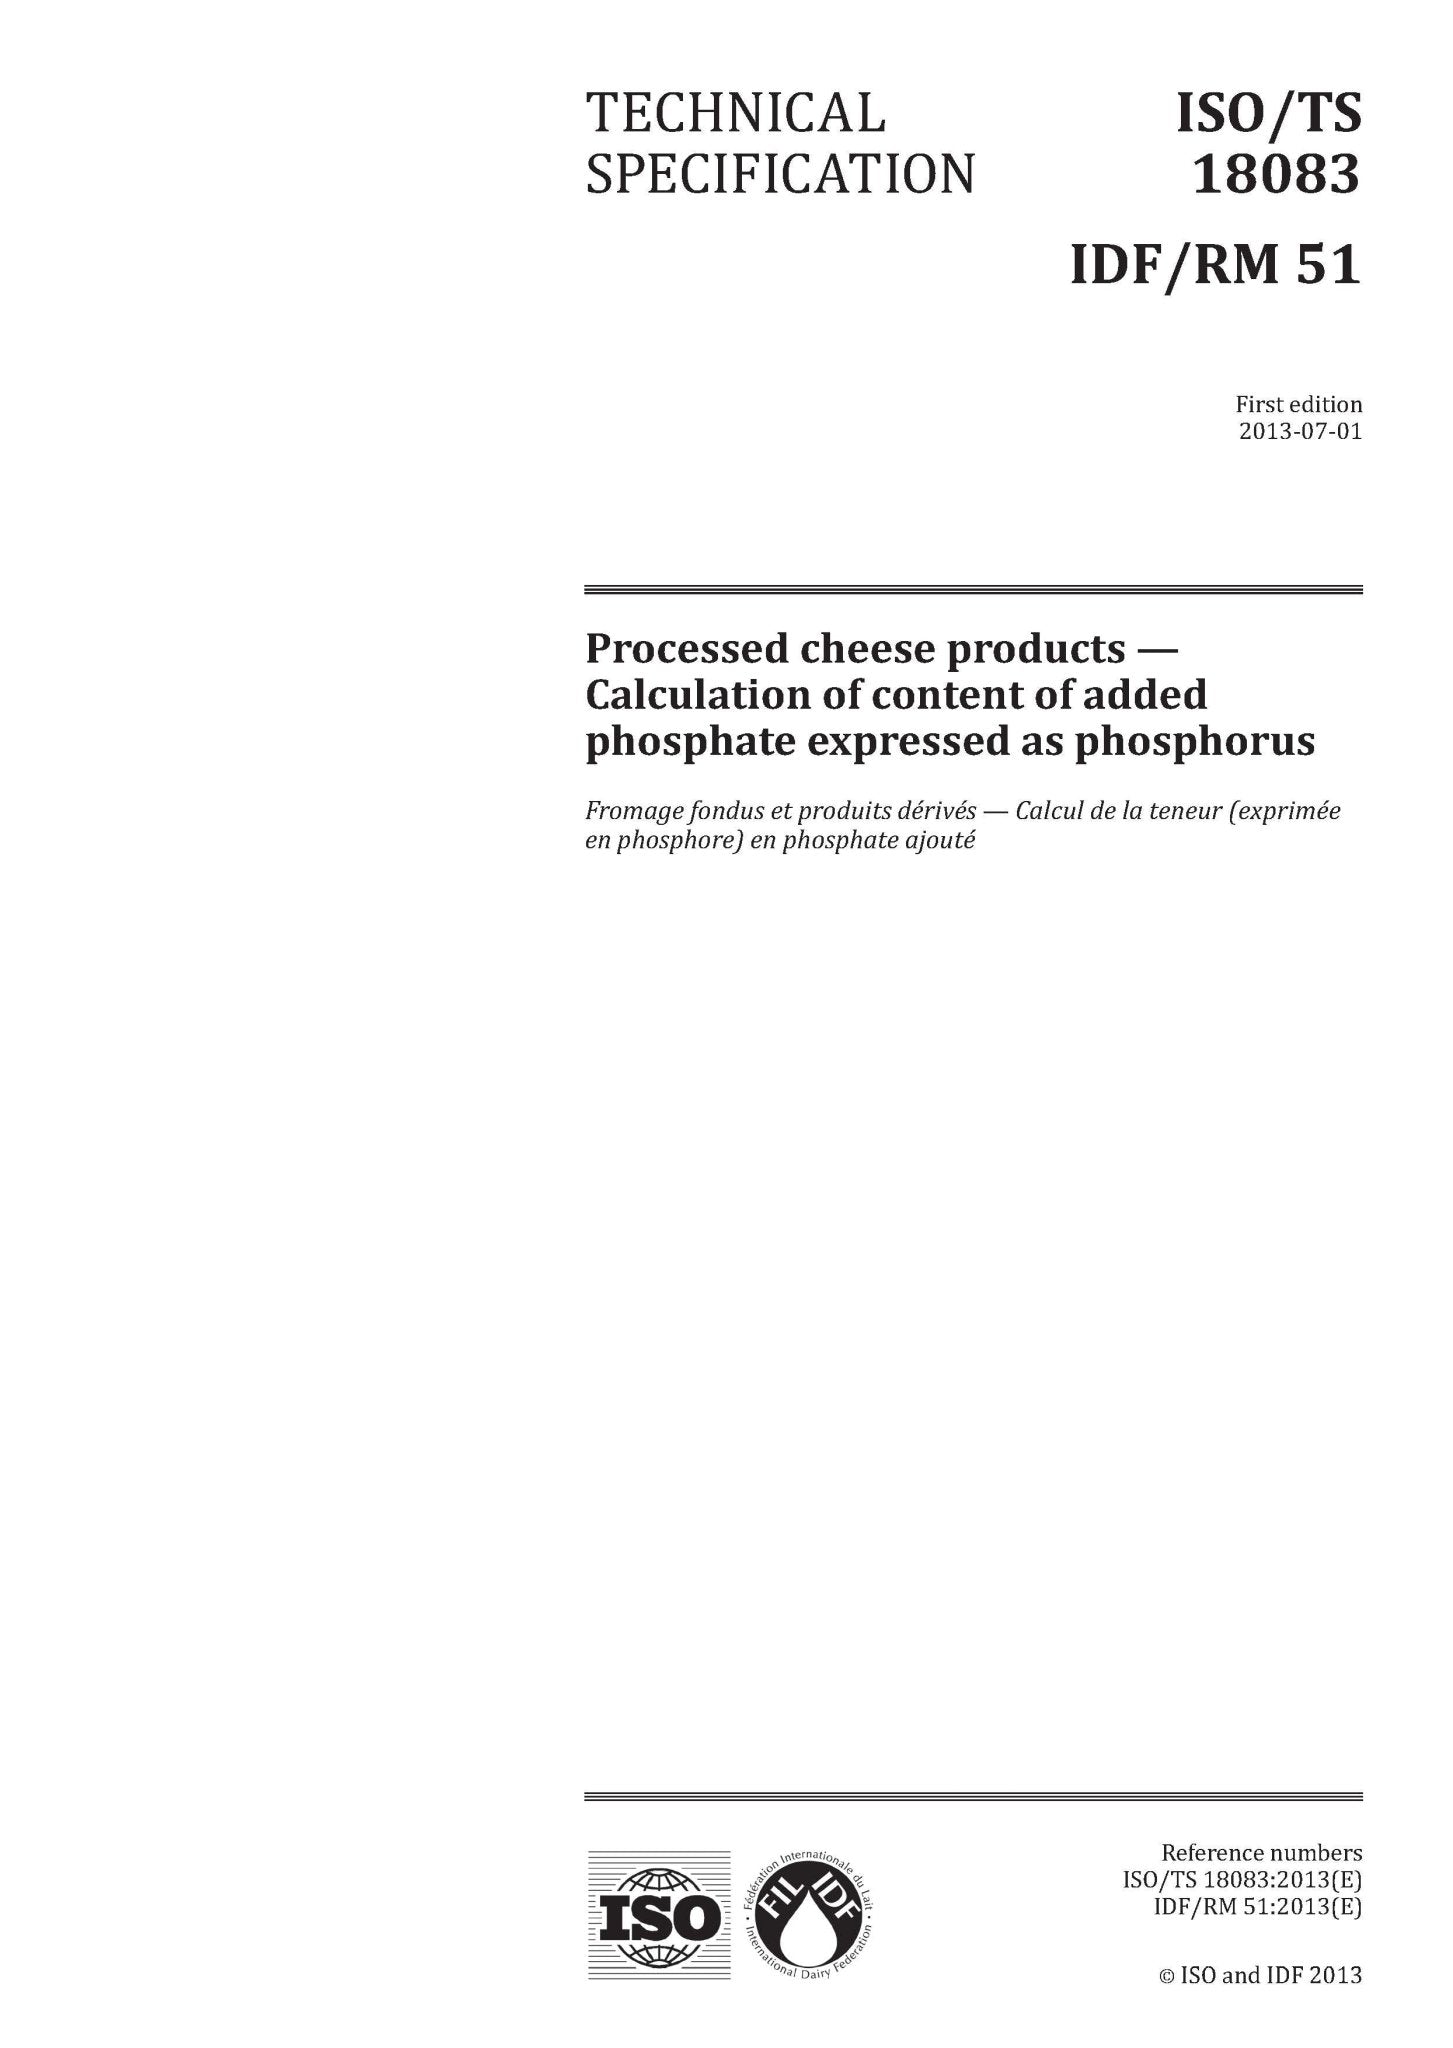 ISO/TS 18083 | IDF/RM 51: 2013 - Processed cheese products - Calculation of content of added phosphate expressed as phosphorus - FIL-IDF